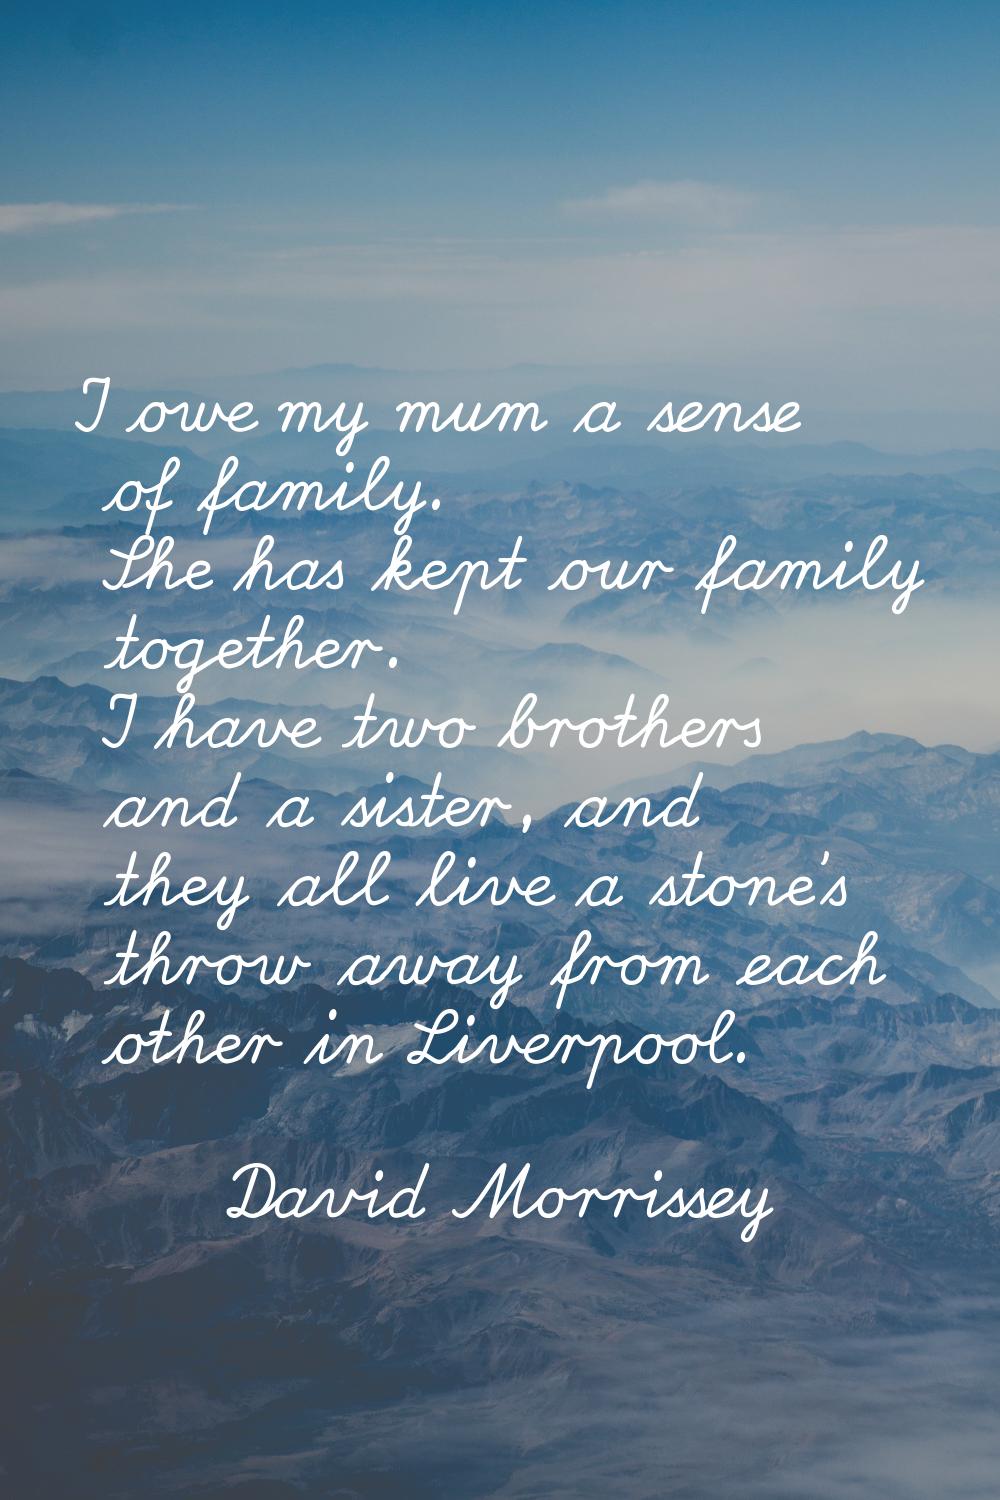 I owe my mum a sense of family. She has kept our family together. I have two brothers and a sister,